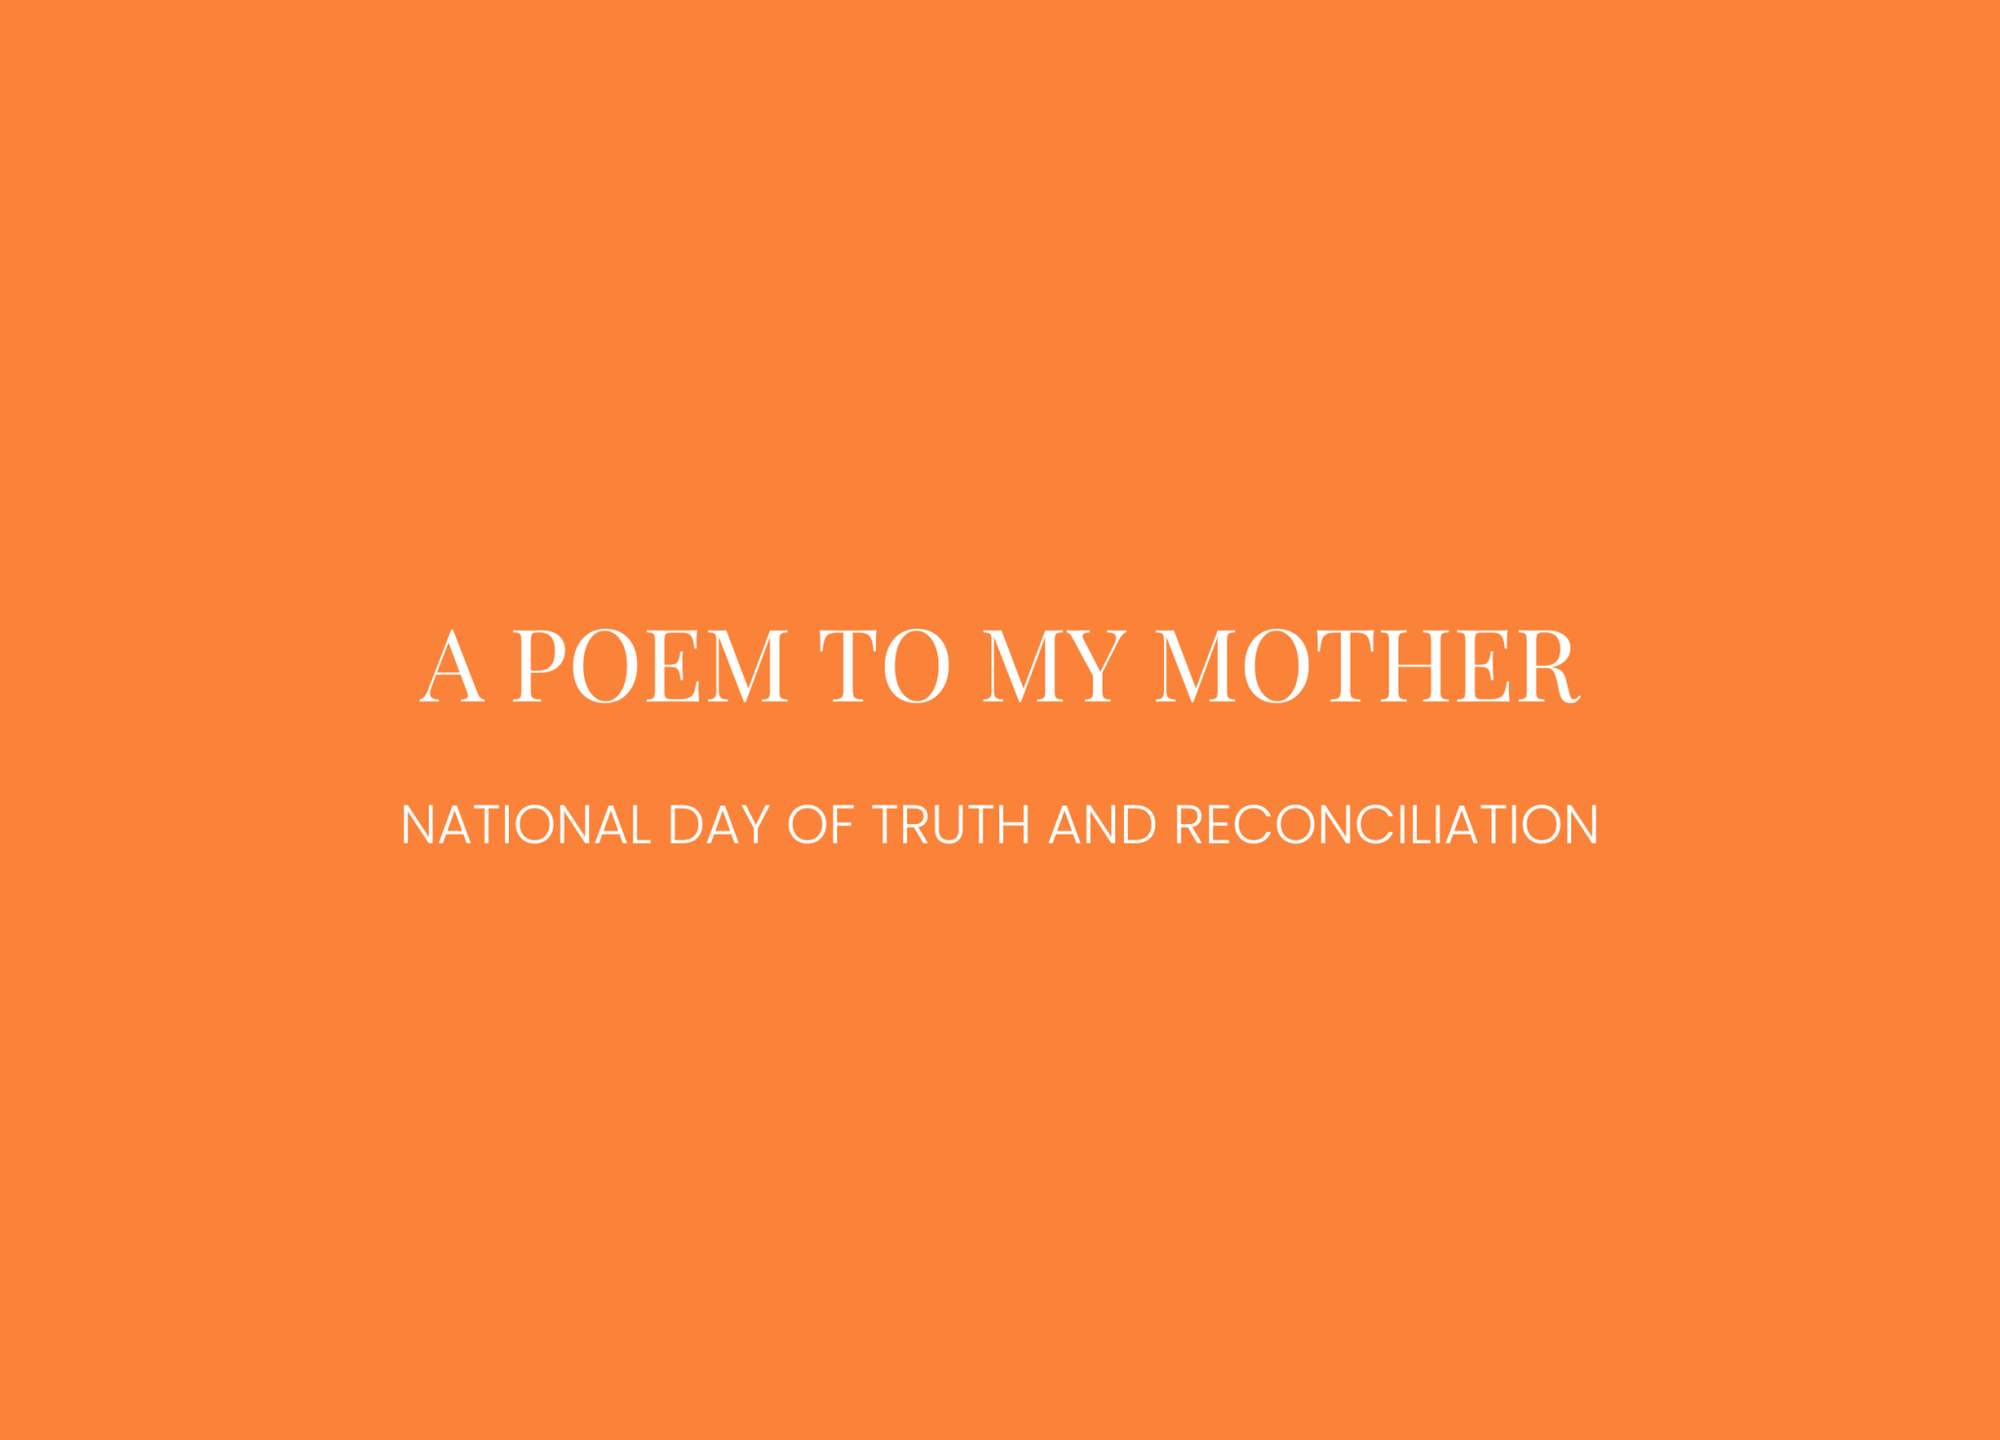 Every Child Matters - A poem to my Mom - ORESTA clean beauty simplified